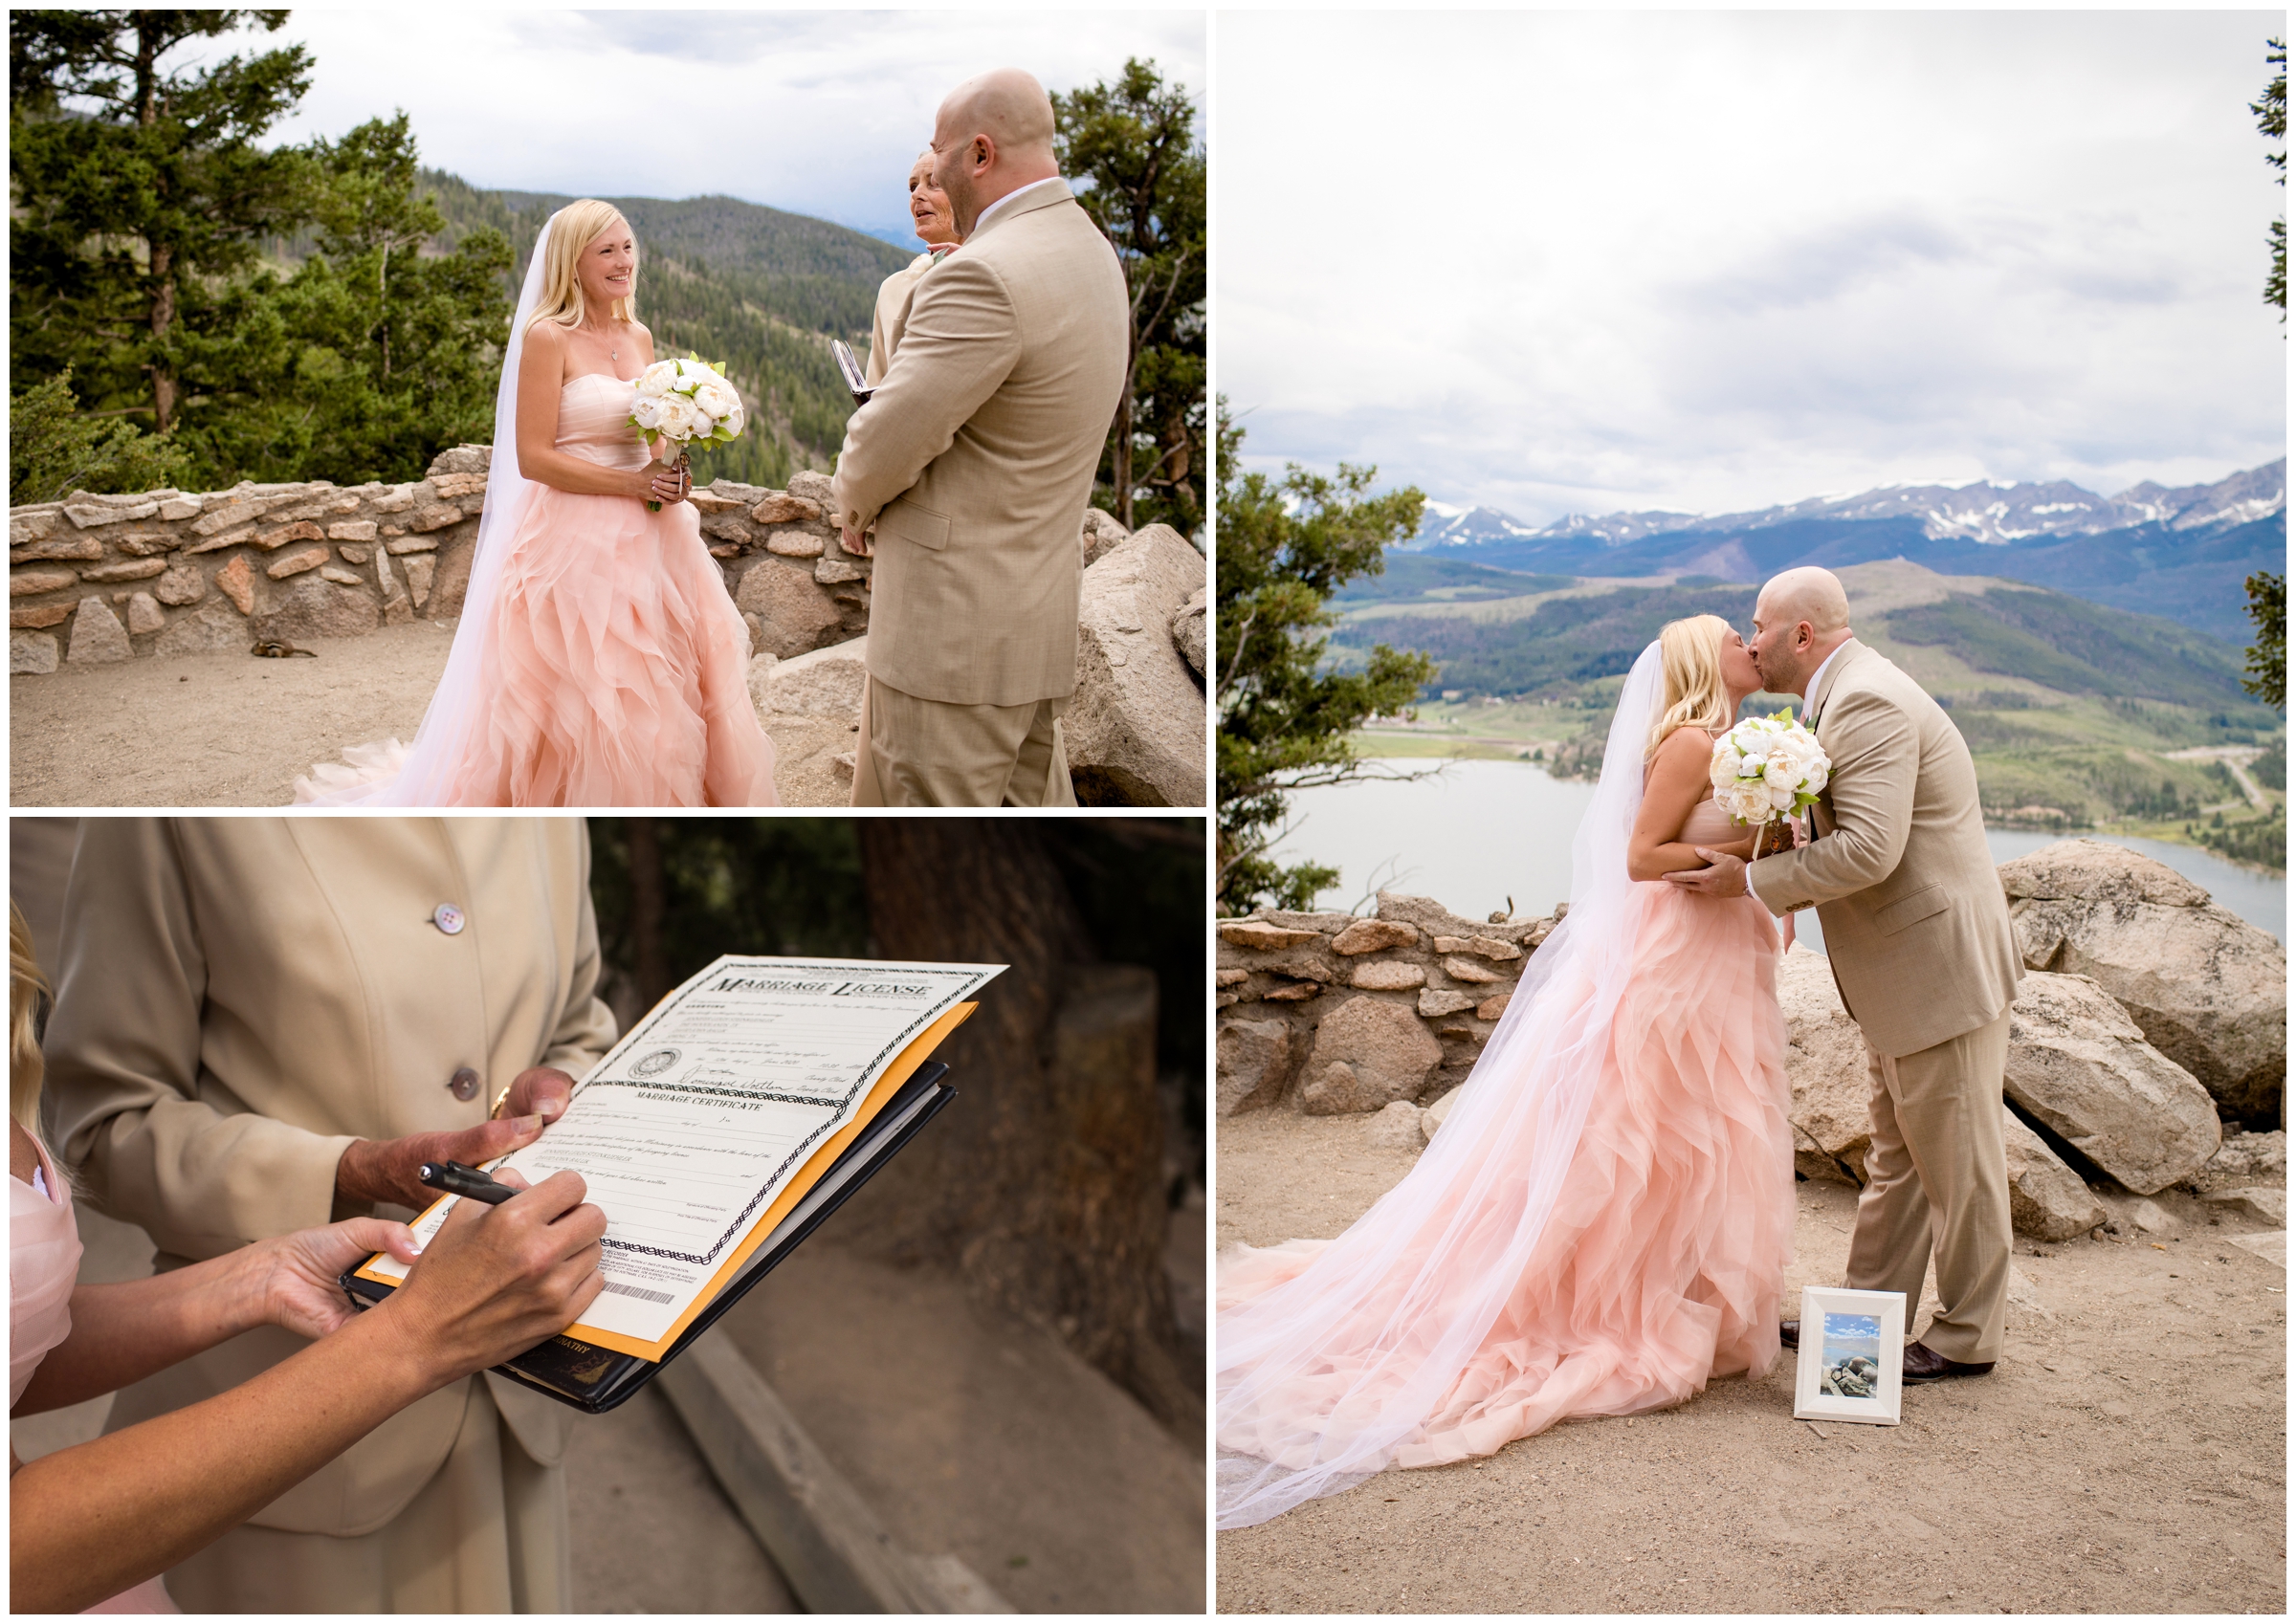 First kiss during intimate elopement wedding in the Colorado mountains